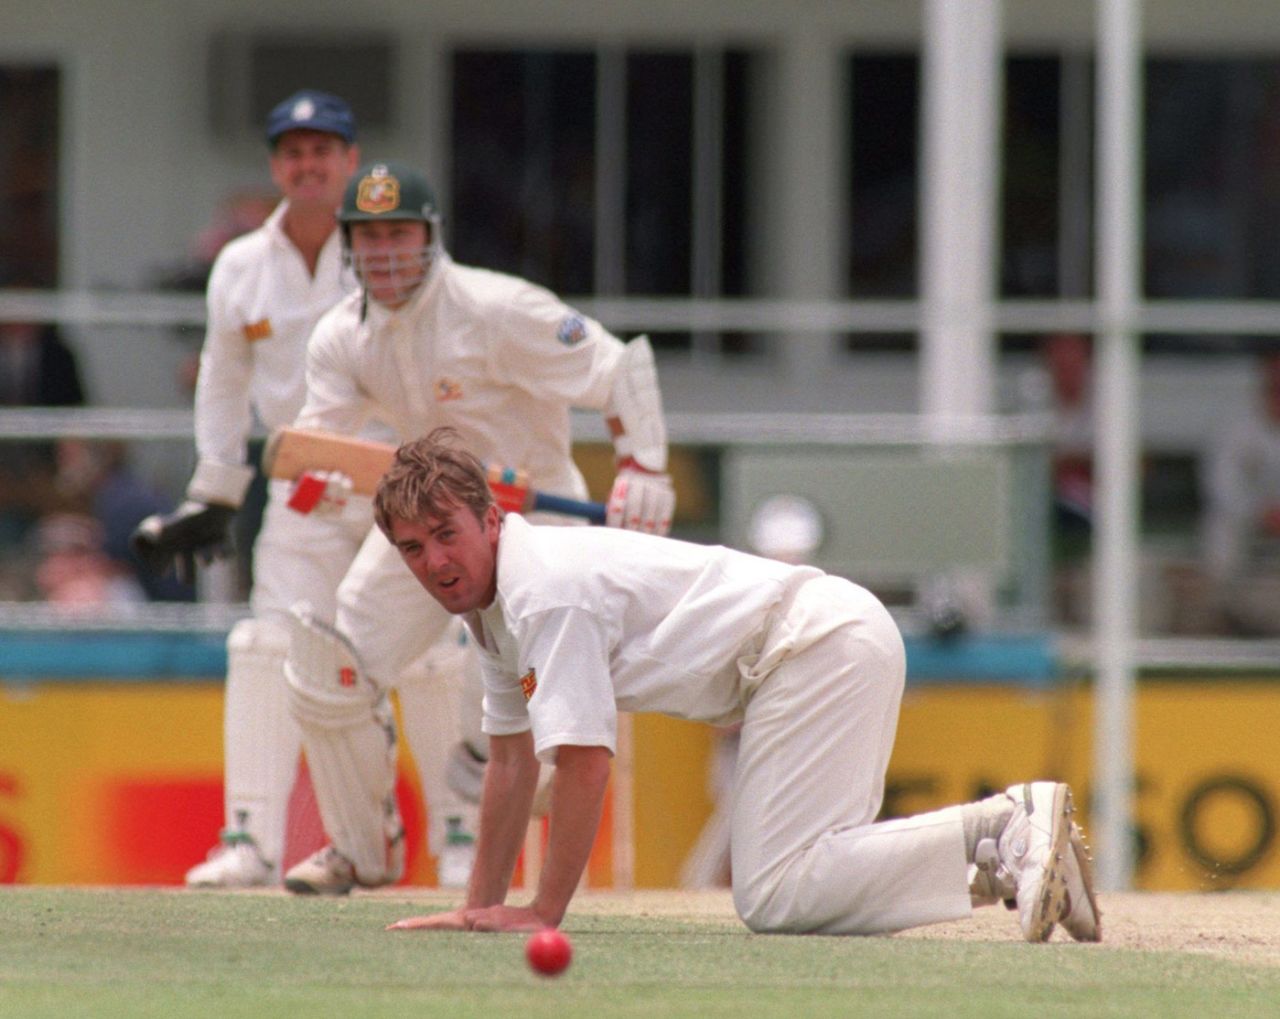 Phil Tufnell fails to stop the ball, hit by Michael Slater, Australia v England, first Test, day one, Brisbane, November 25, 1994